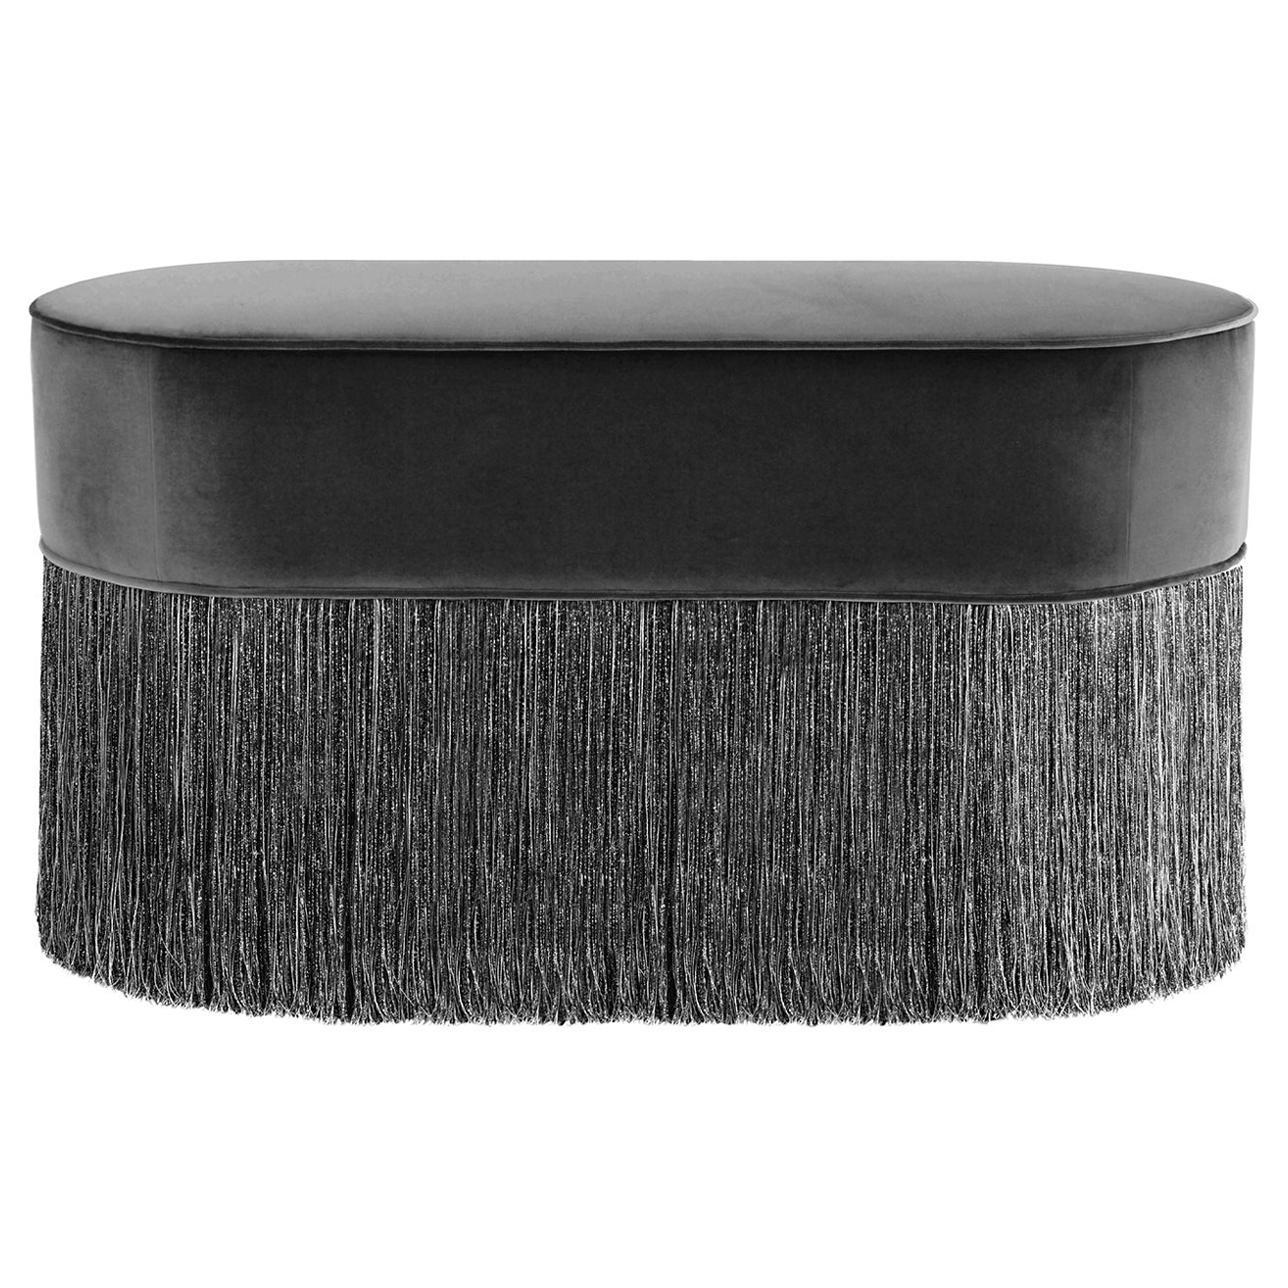 Sparkle Black Oval Ottoman with Black and Silver Fringe